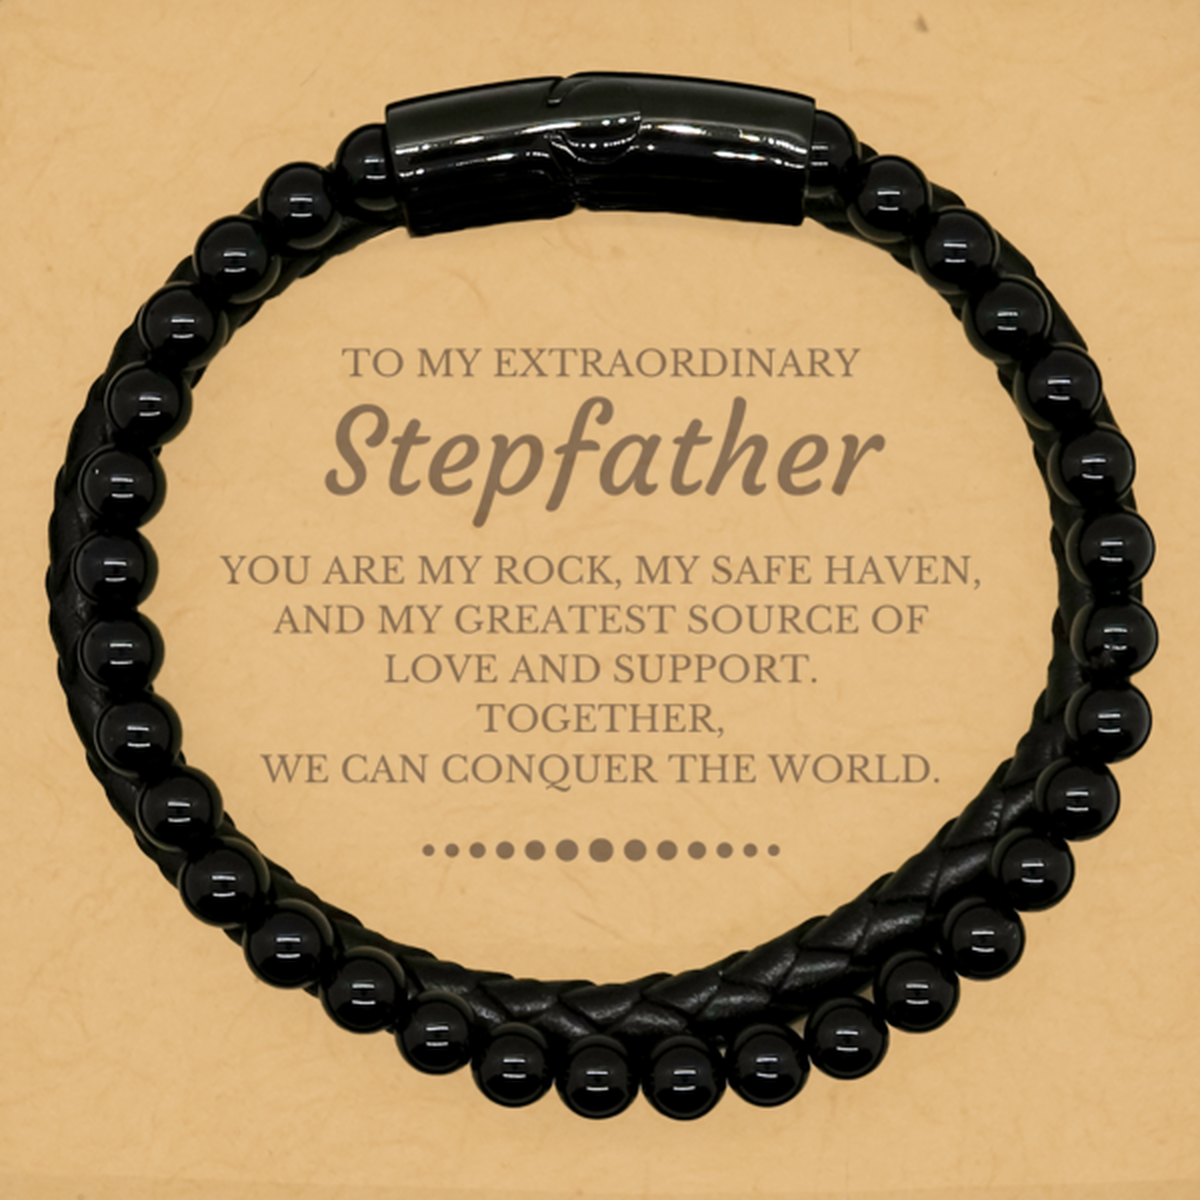 To My Extraordinary Stepfather Gifts, Together, we can conquer the world, Birthday Stone Leather Bracelets For Stepfather, Christmas Gifts For Stepfather